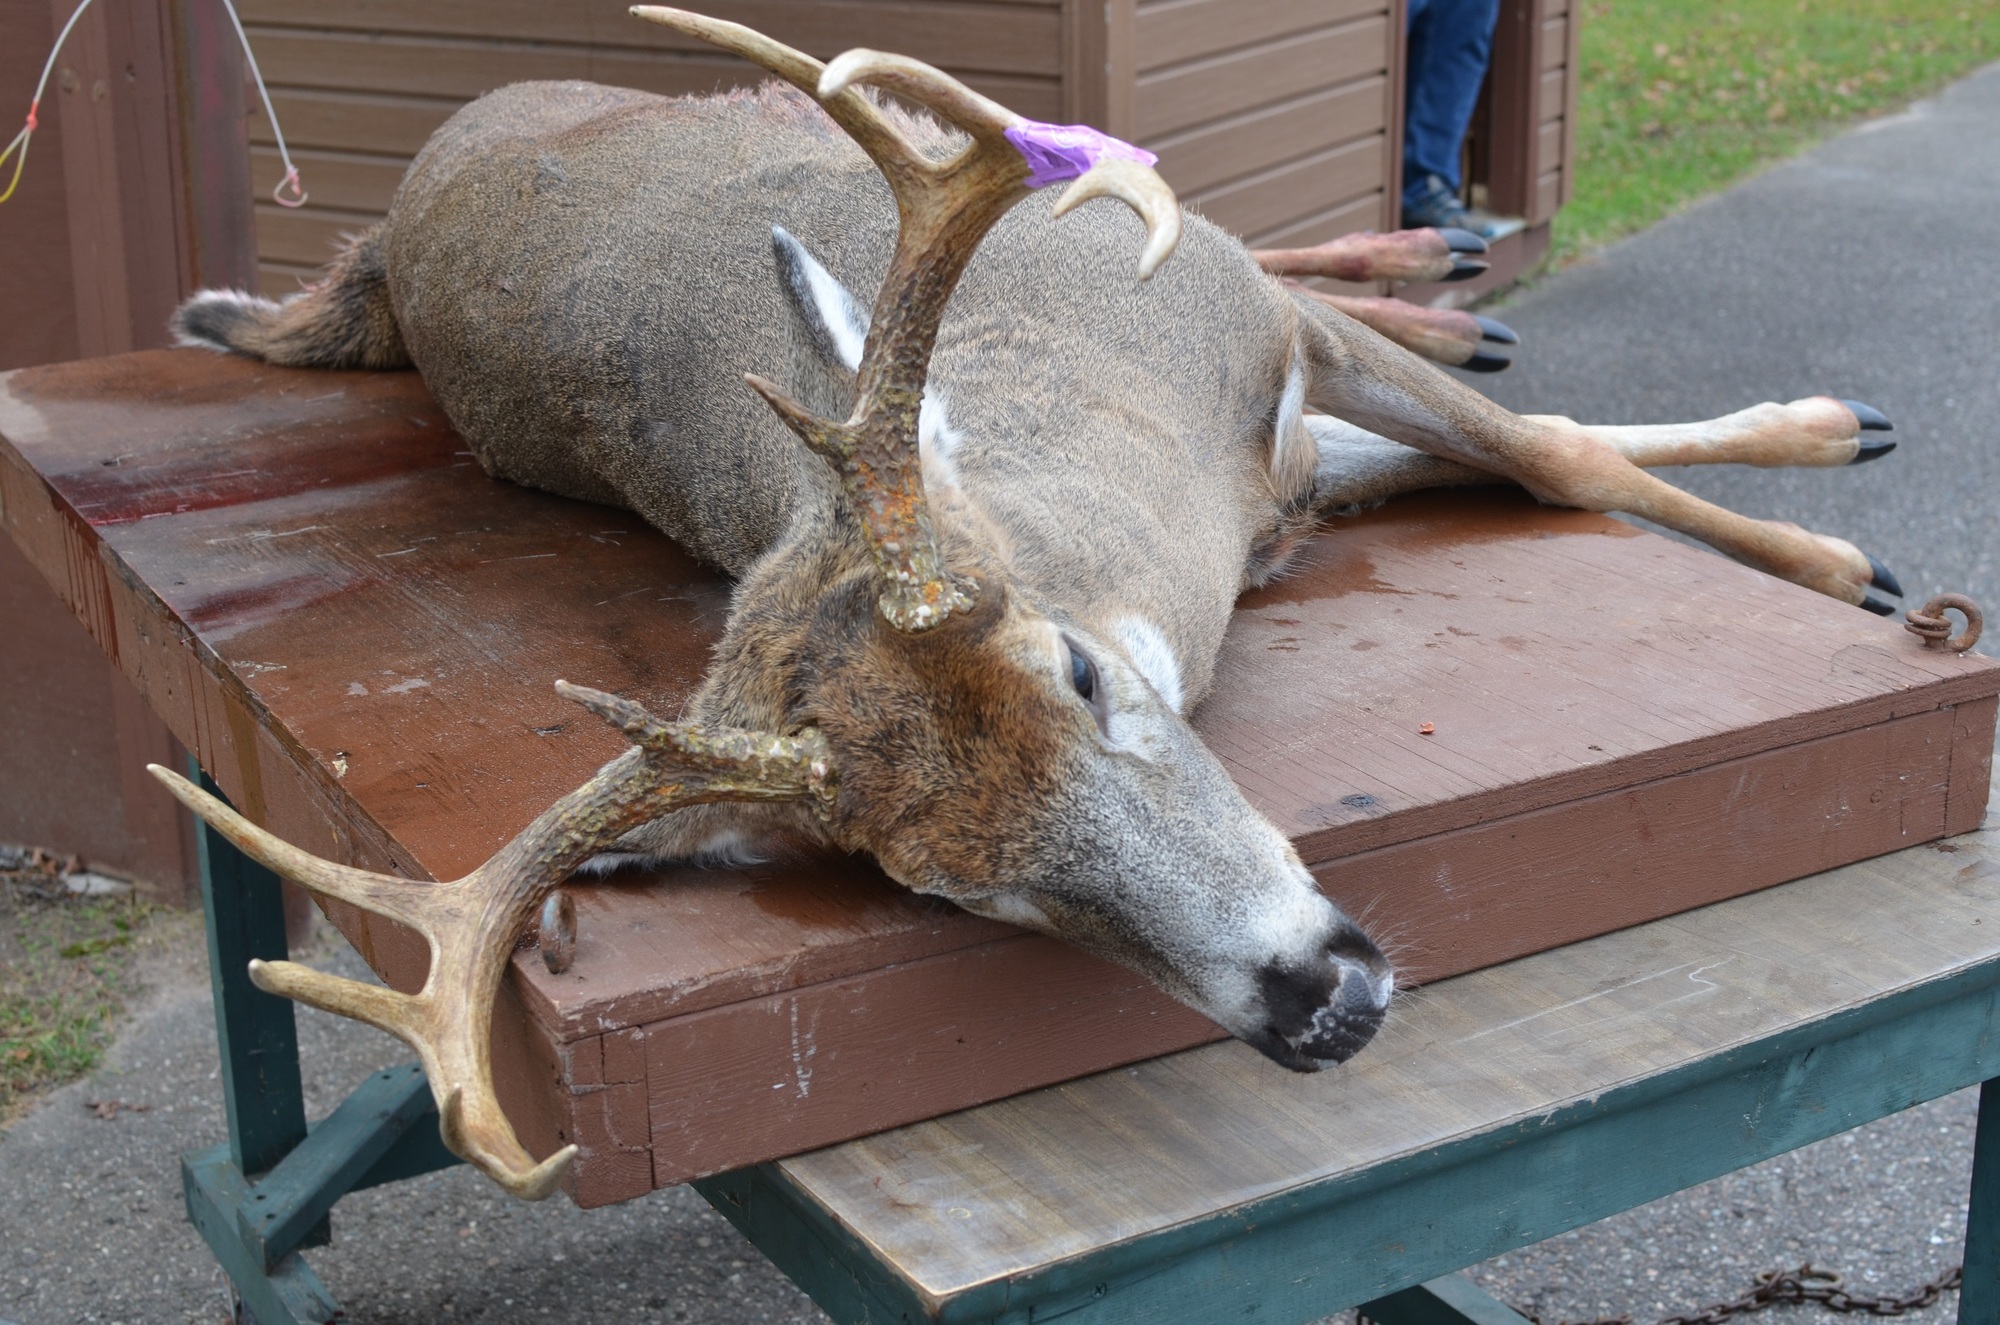 A nice buck checked in at the Marquette check station, a reminder of the fine hunting tradition the U.P. CWD Task Force hopes to help preserve.